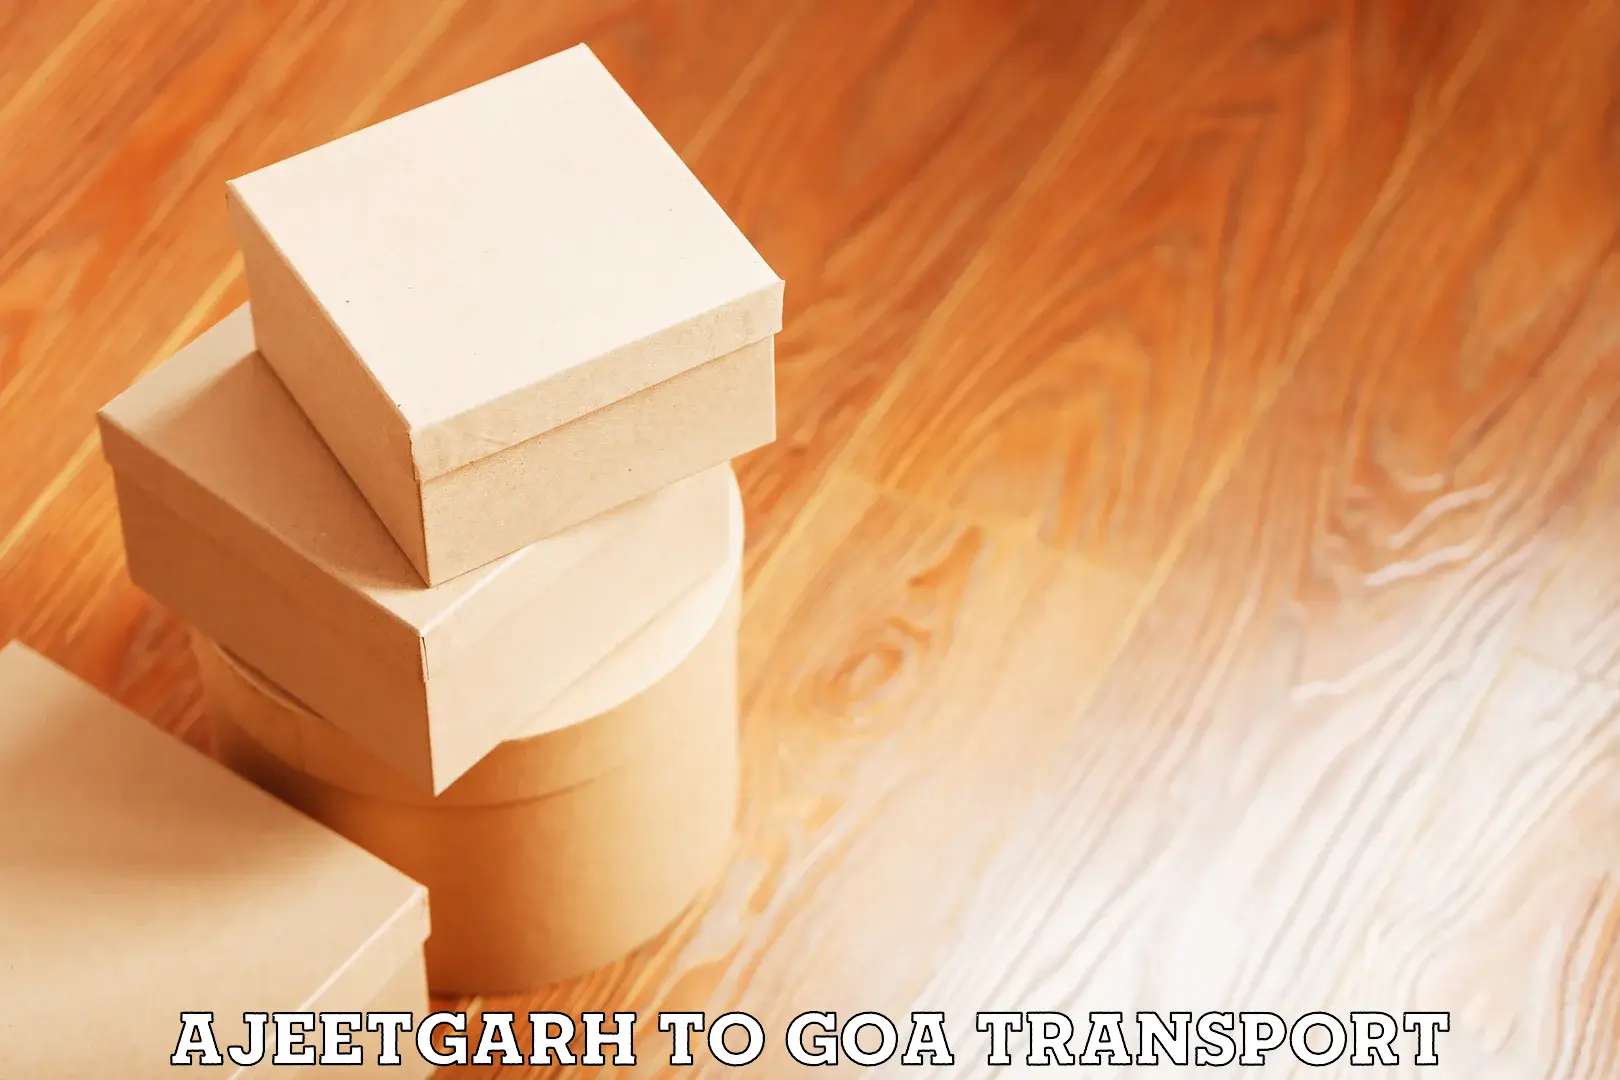 Daily parcel service transport Ajeetgarh to IIT Goa